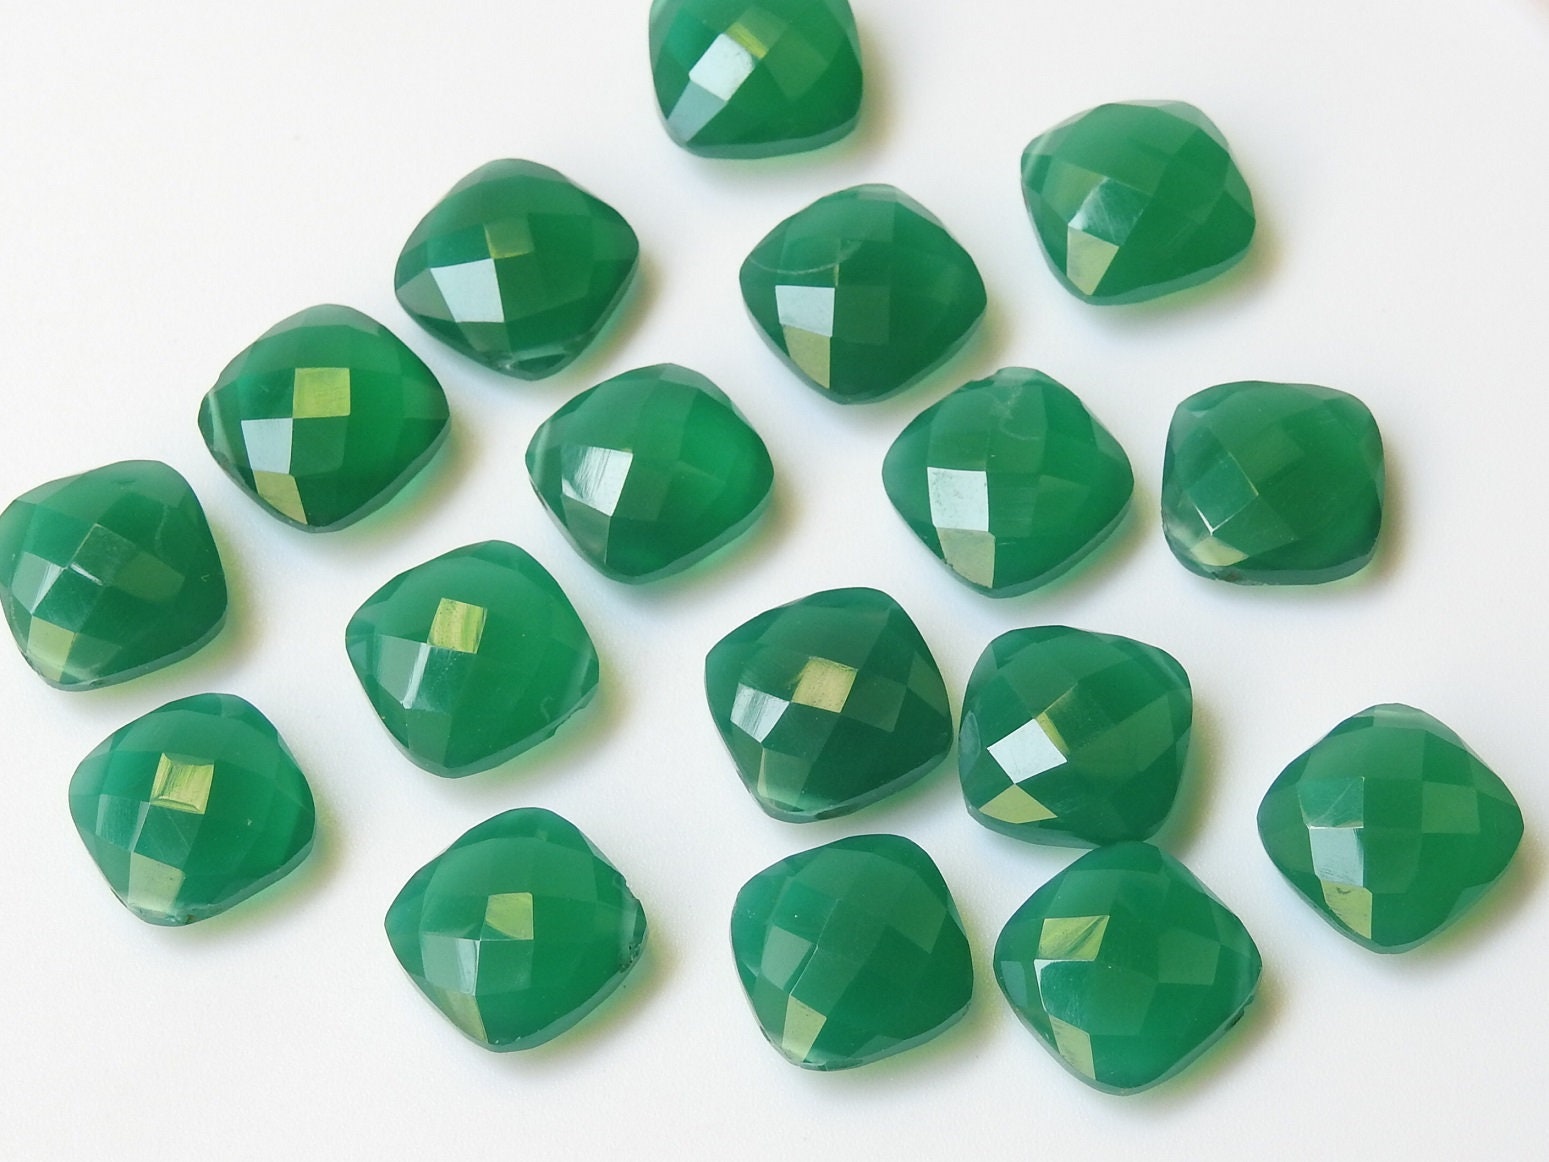 12X12MM Pair,Green Onyx Faceted Cushions,Square Shape Briolette,Teardrop,Loose Stone,Earrings Jewelry,Wholesaler,Supplies PME-CY1 | Save 33% - Rajasthan Living 15